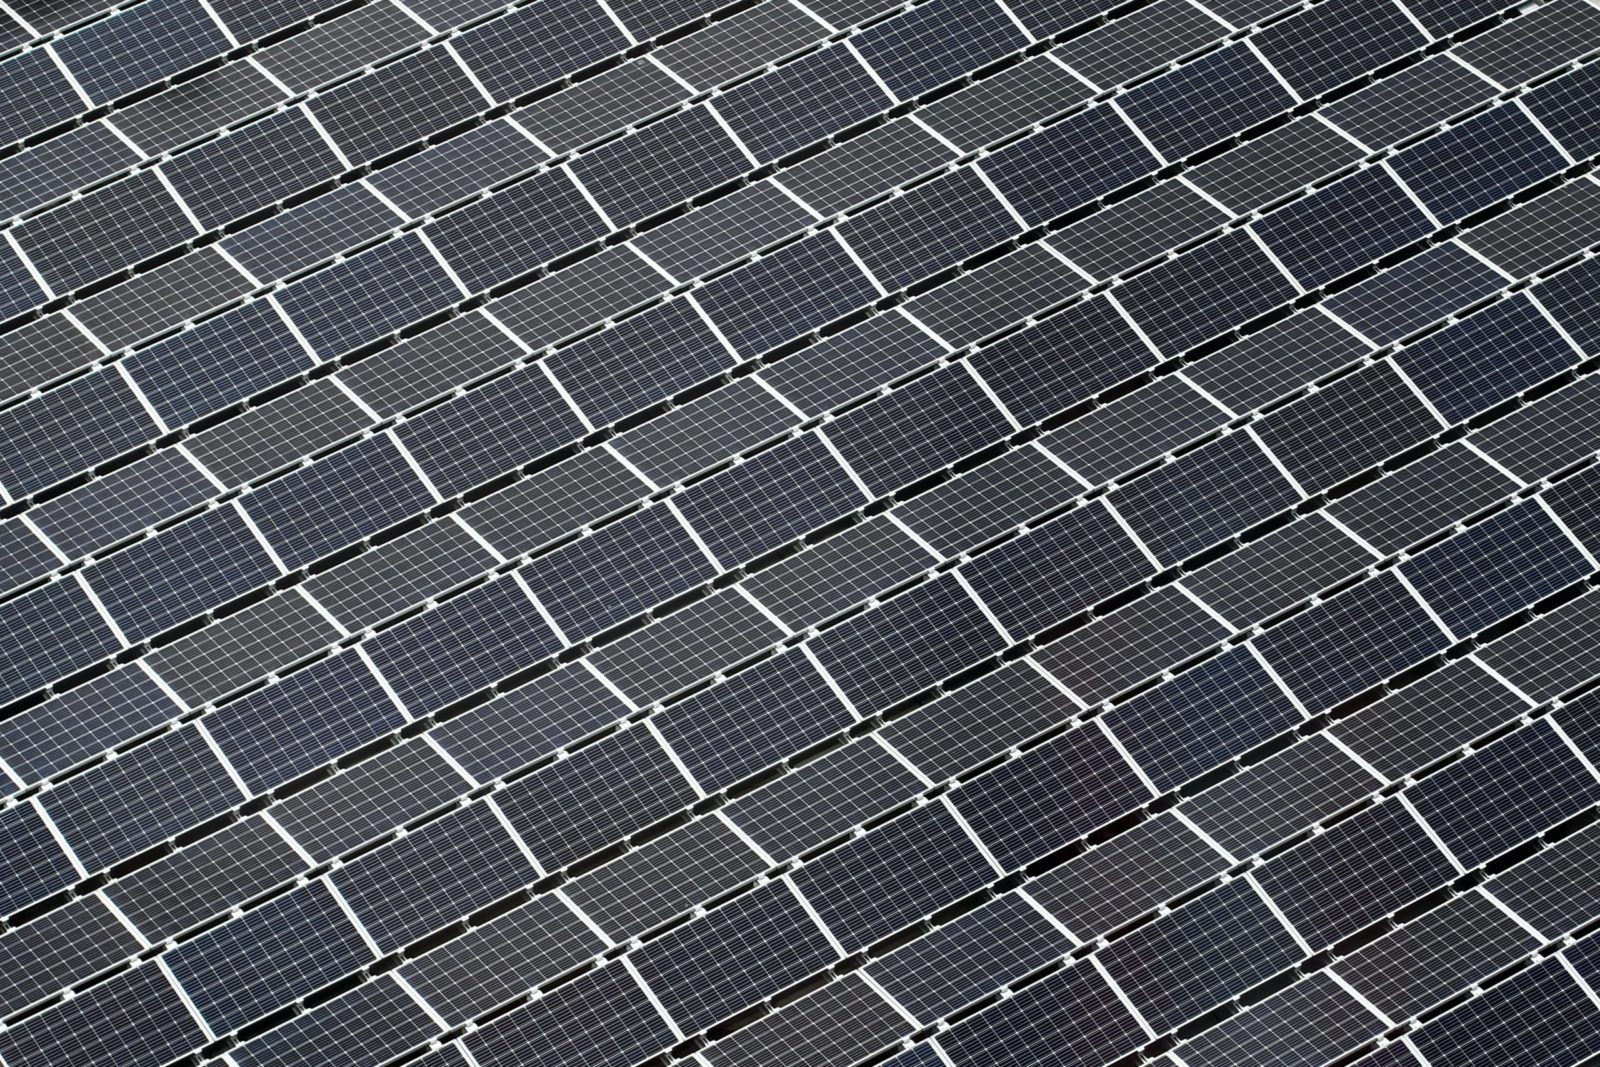 What are the consequences of changing feed-in tariffs in photovoltaics?